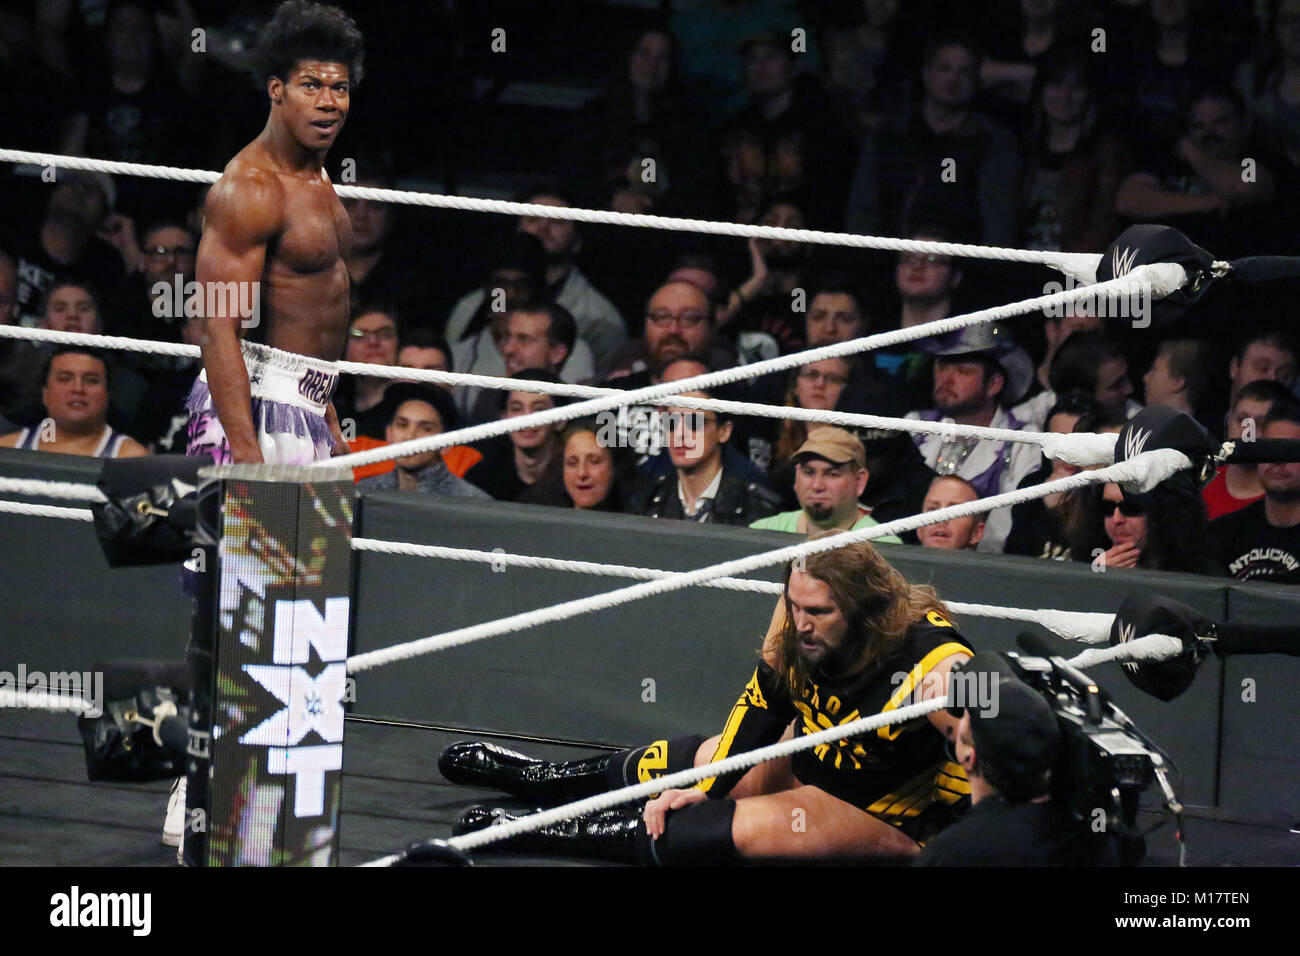 Philadelphia, PA, USA. 27th Jan, 2018. Velveteen Dream wins match at WWE NXT Take Over at Wells Fargo Center in Philadelphia, Pa on January 27, 2018 Credit: Star Shooter/Media Punch/Alamy Live News Stock Photo